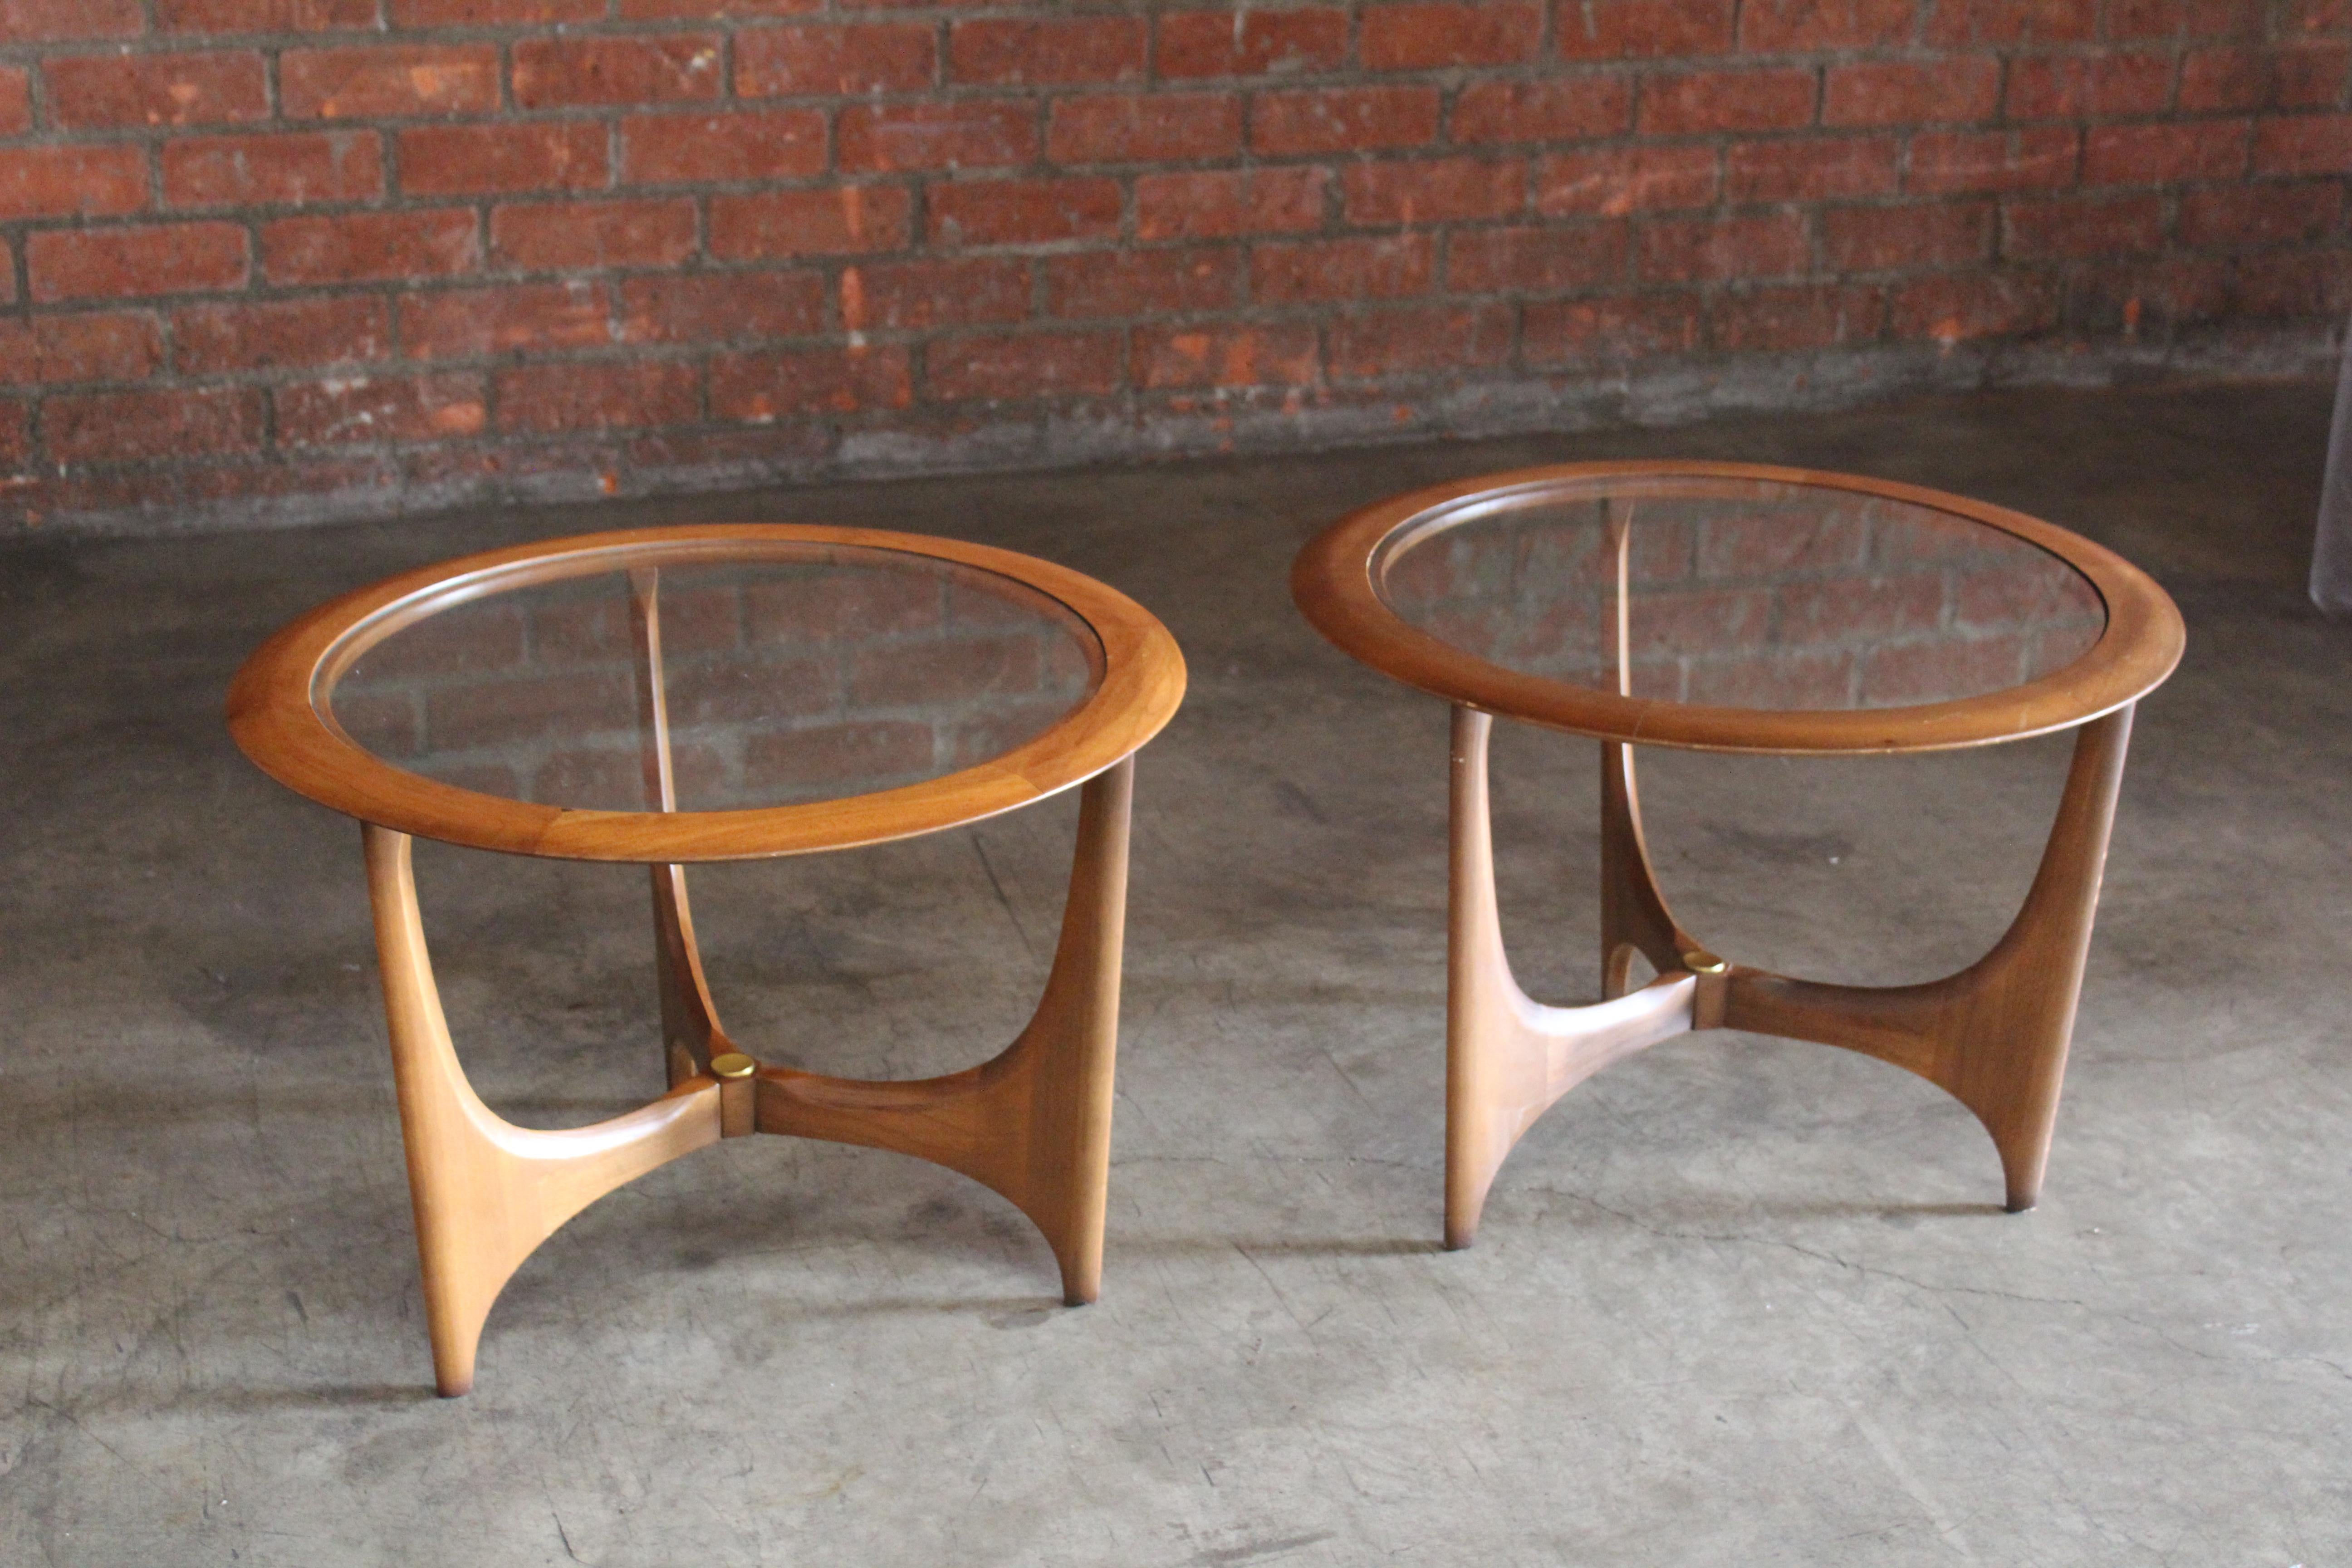 60s end tables